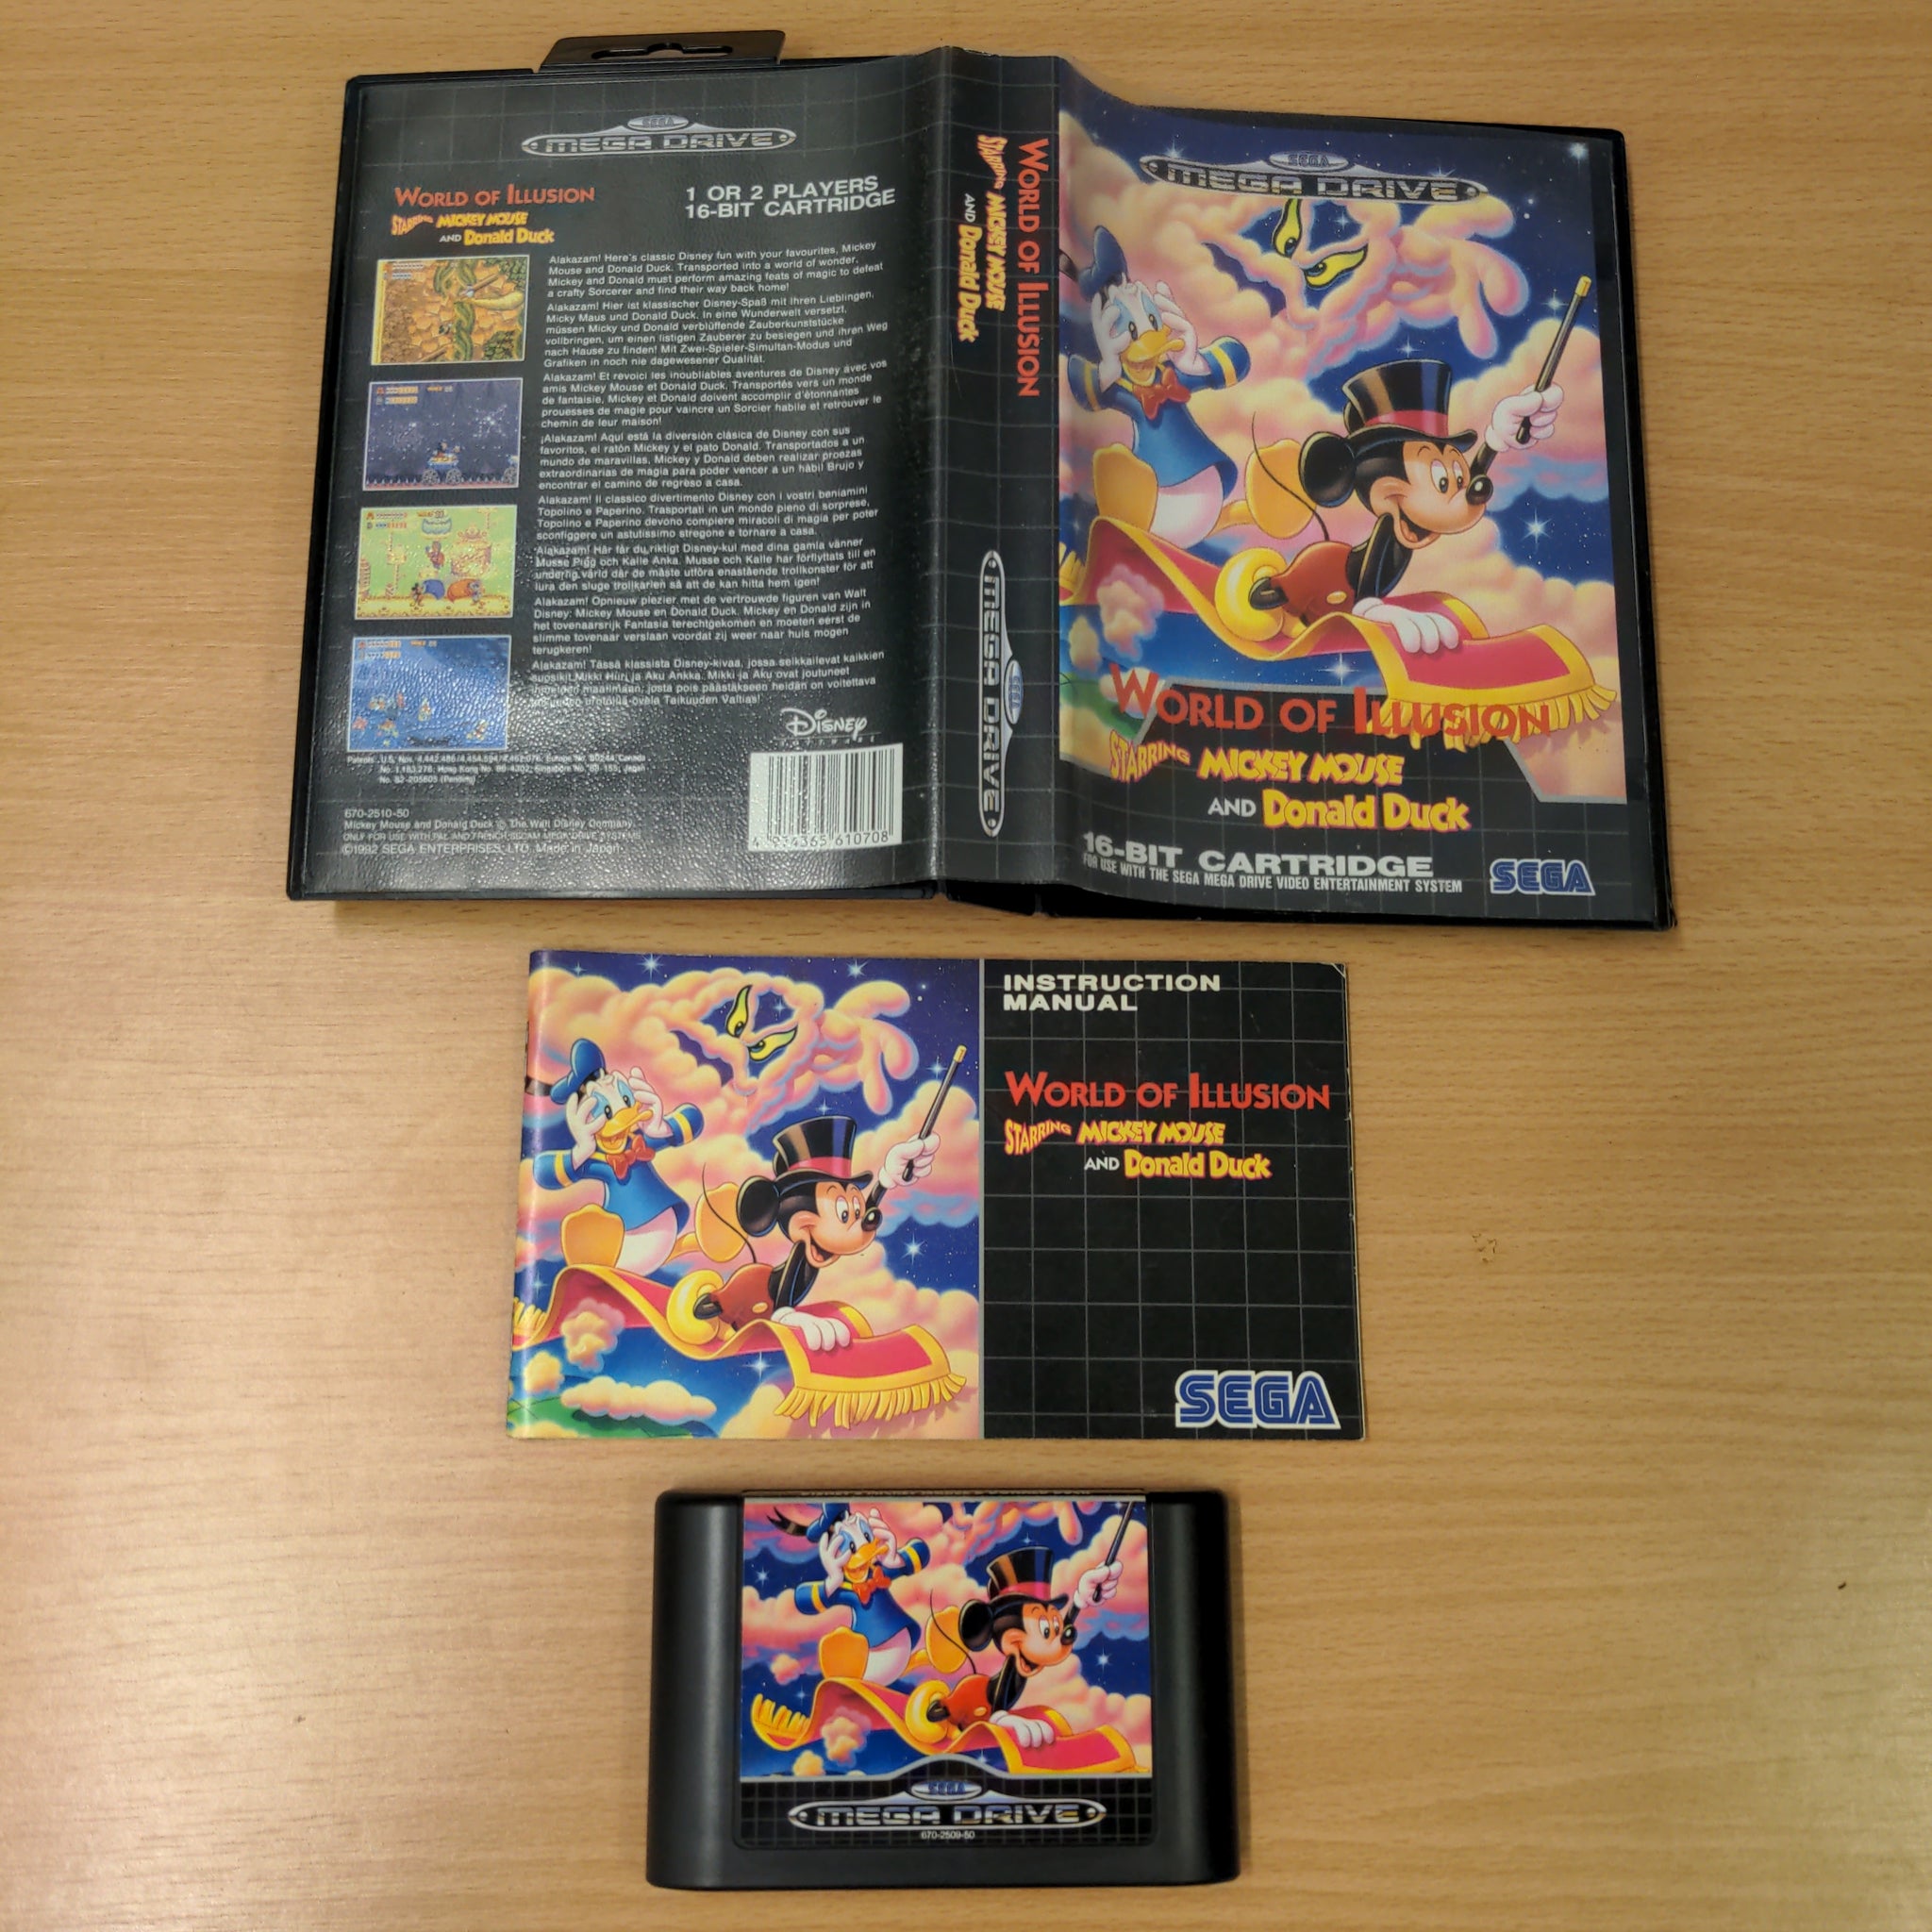 World of Illusion starring Mickey Mouse and Donald Duck (Disney's) Sega Mega Drive game complete